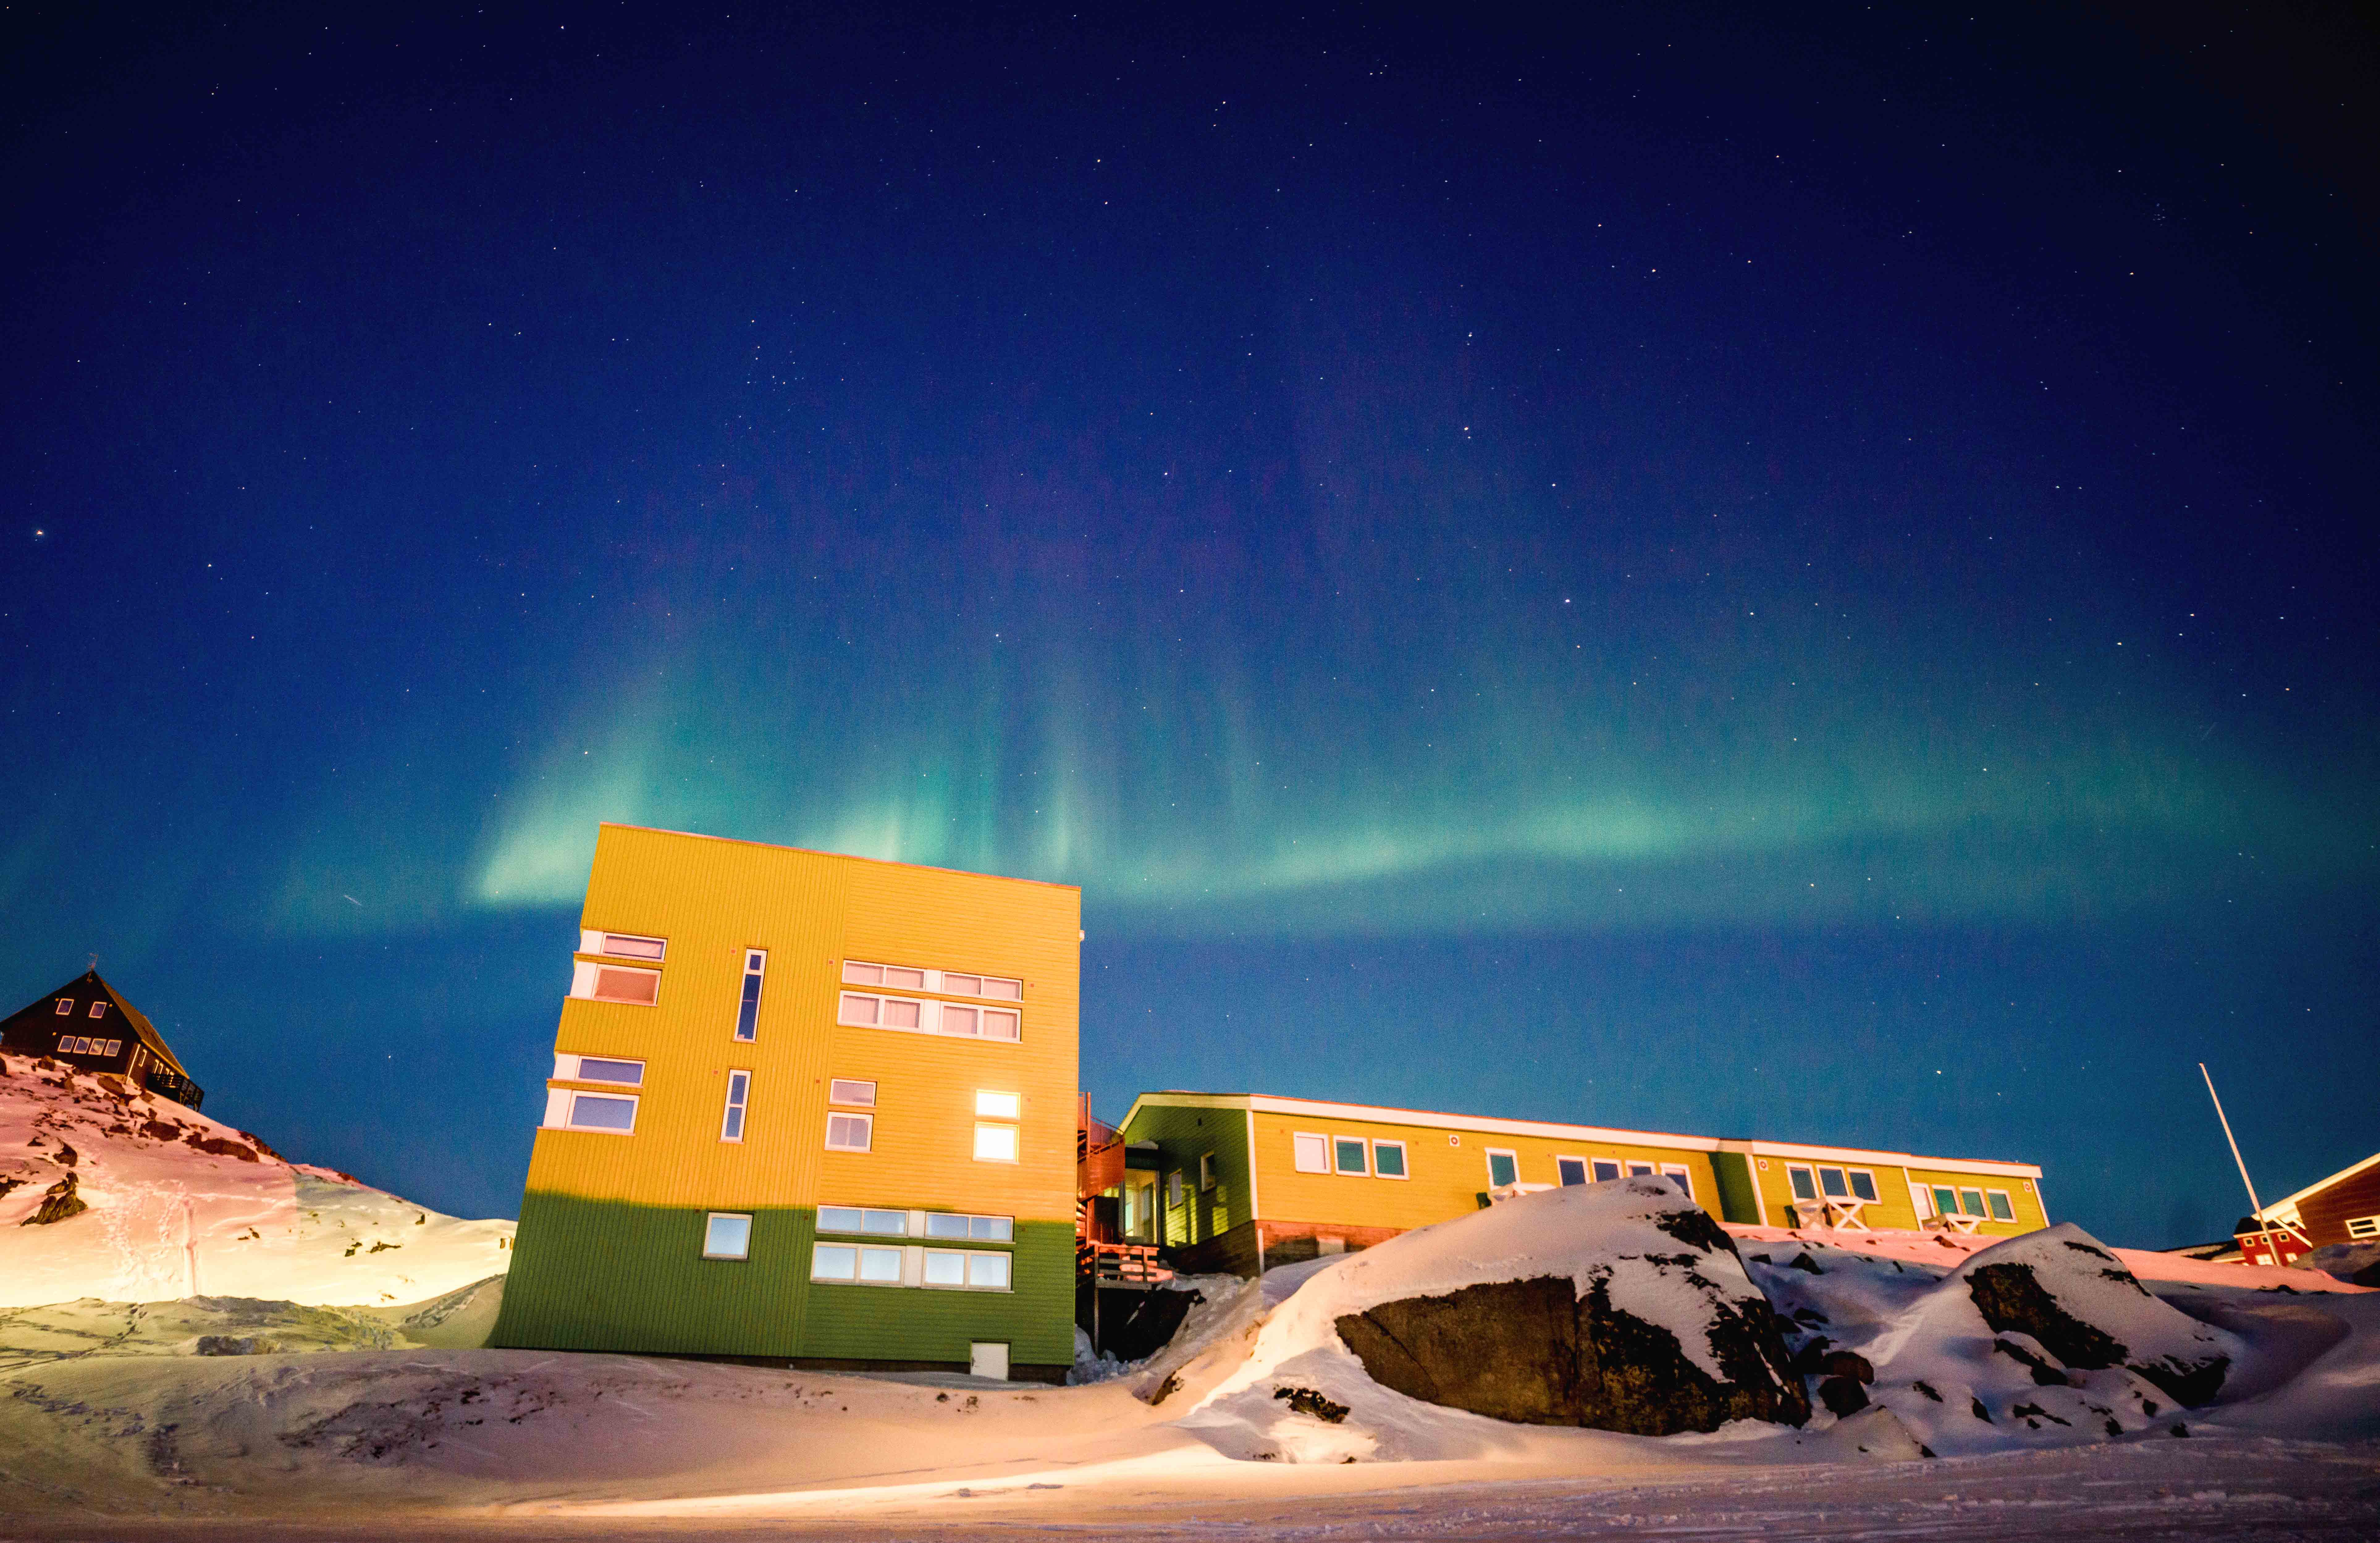 Above a green and yellow building and a snow covered street. A green band of aurora arcs across a blue night sky.